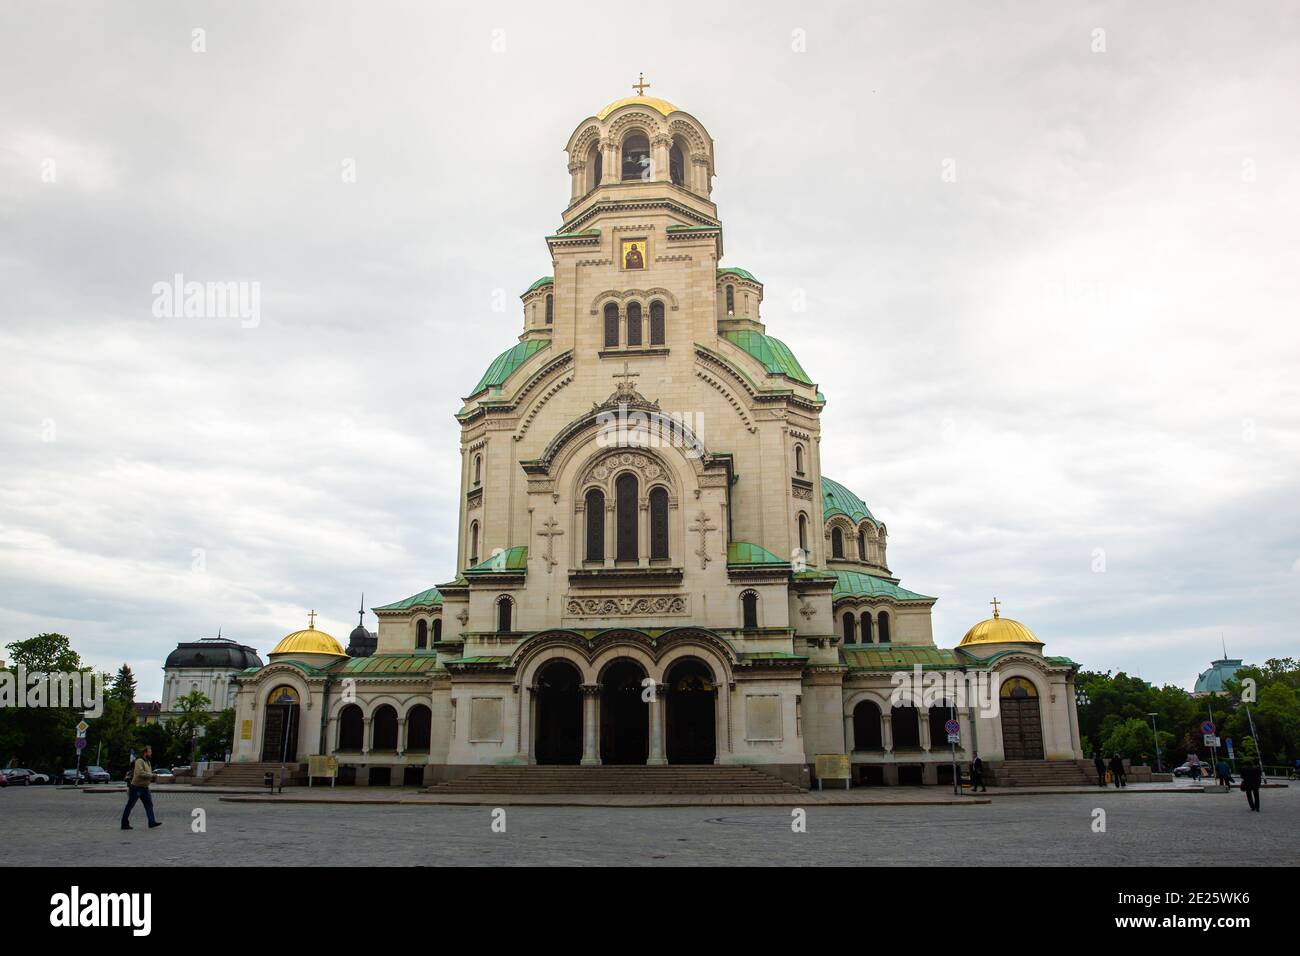 Sofia / Bulgaria, May 13 2019: The primary tourist attraction of the Bulgarian capital: the Alexander Nevsky Memorial Cathedral Stock Photo